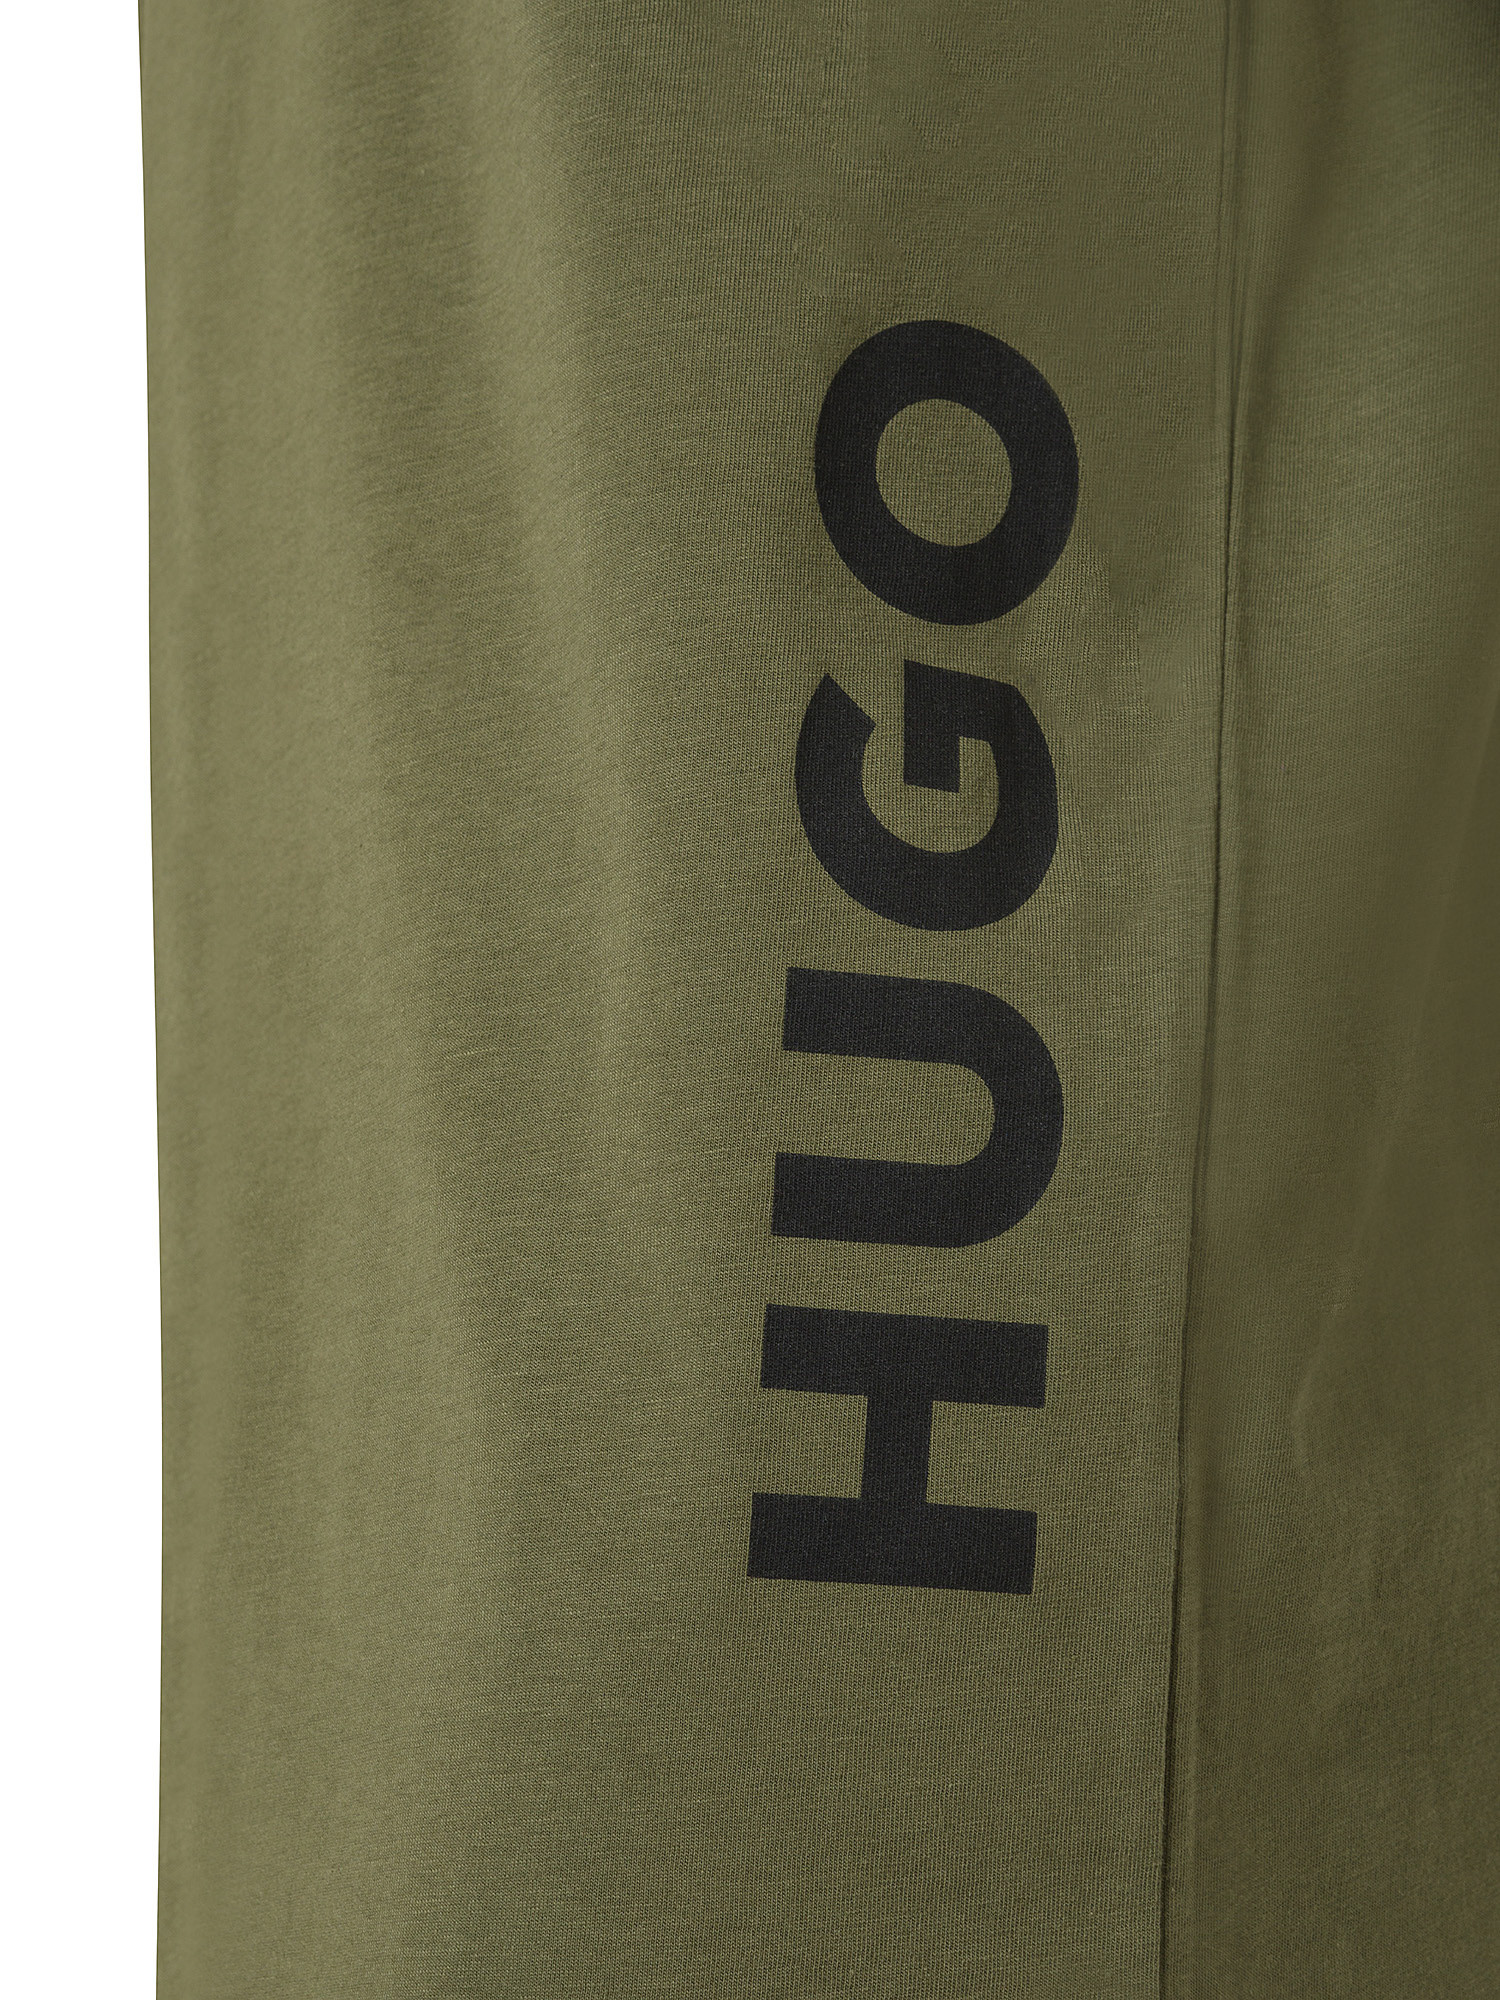 Hugo - T-shirt con stampa logo in cotone, Verde scuro, large image number 2